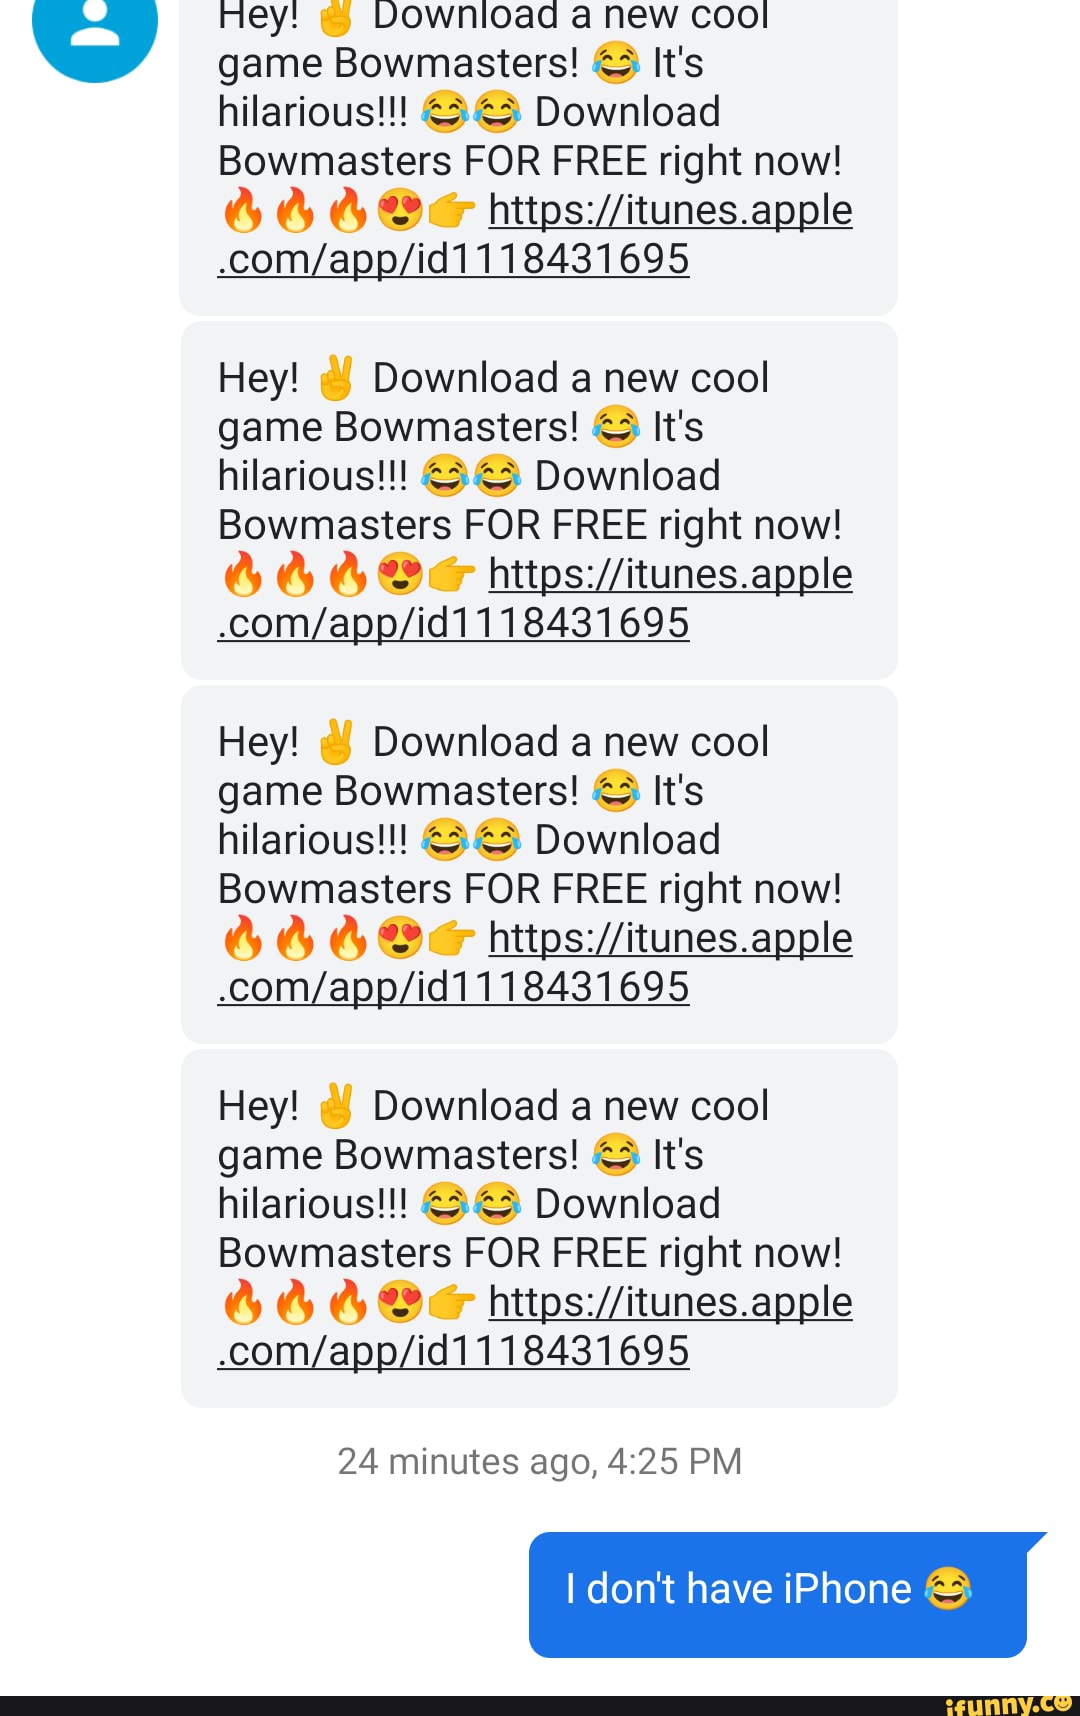 bowmasters download